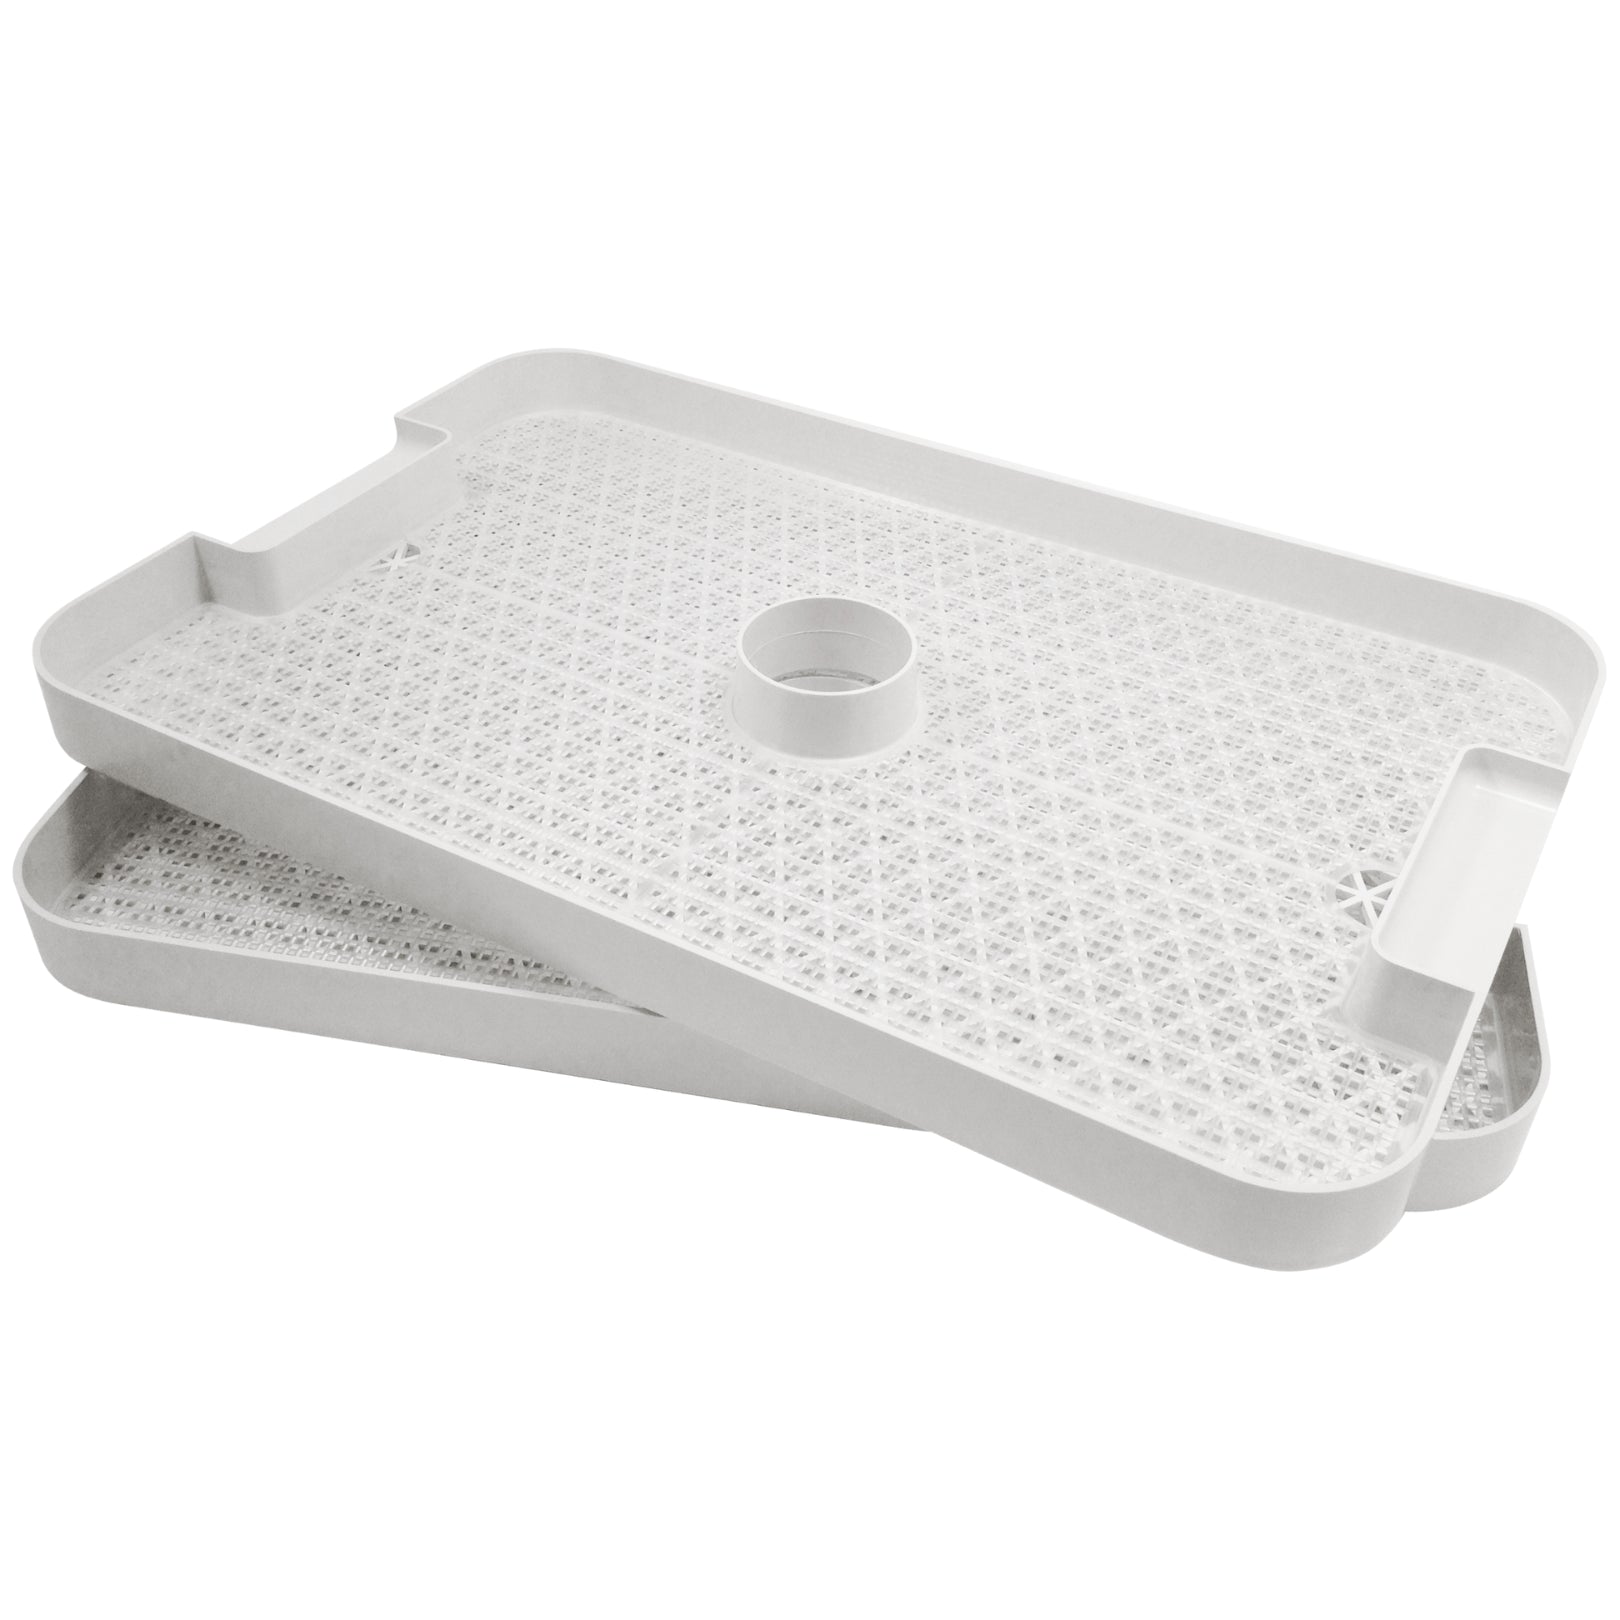 Trays for L'equip Filter Pro Food Dehydrator (Set of 2)